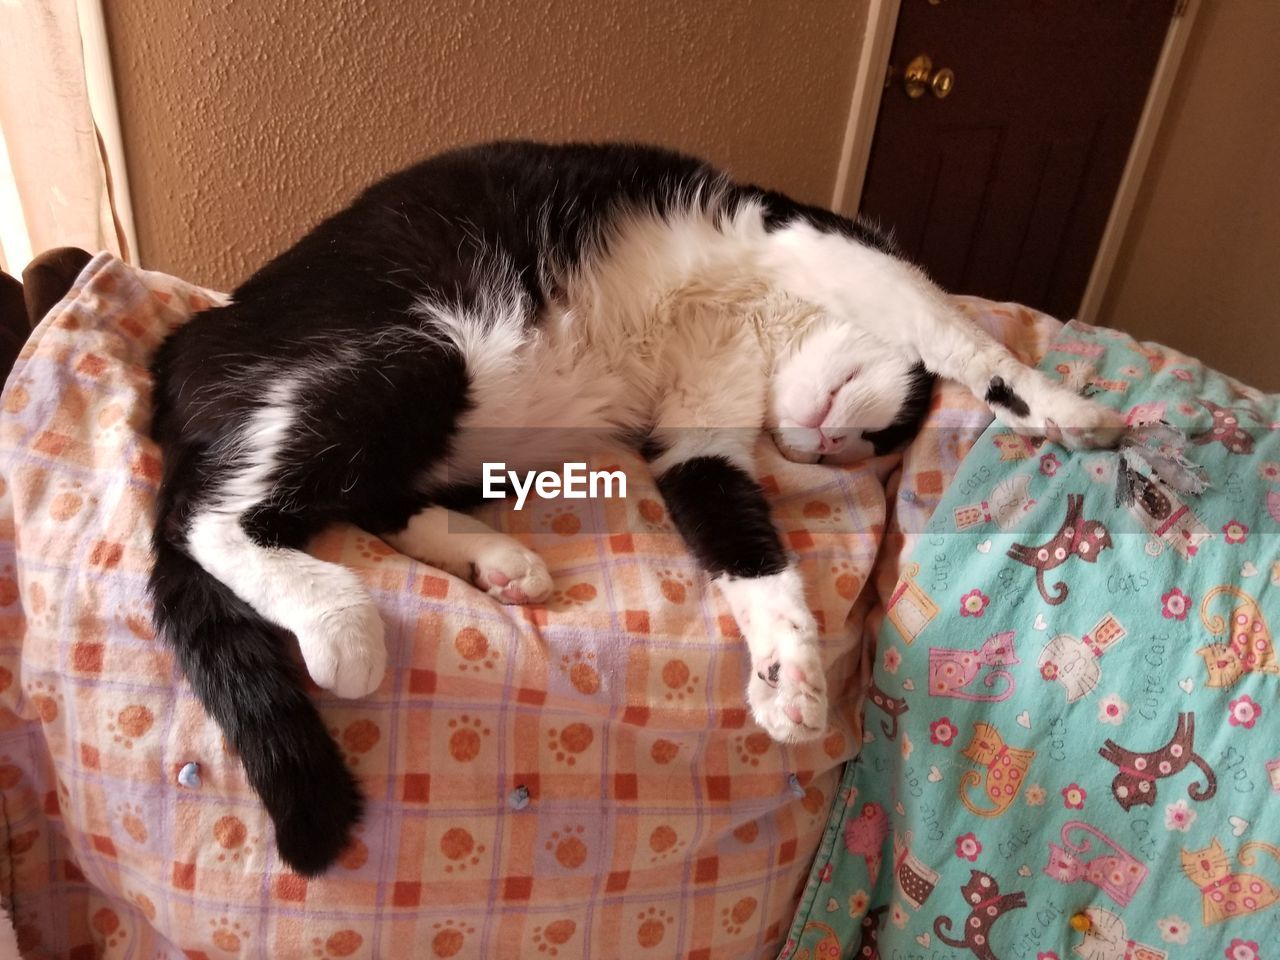 CAT SLEEPING ON A BED